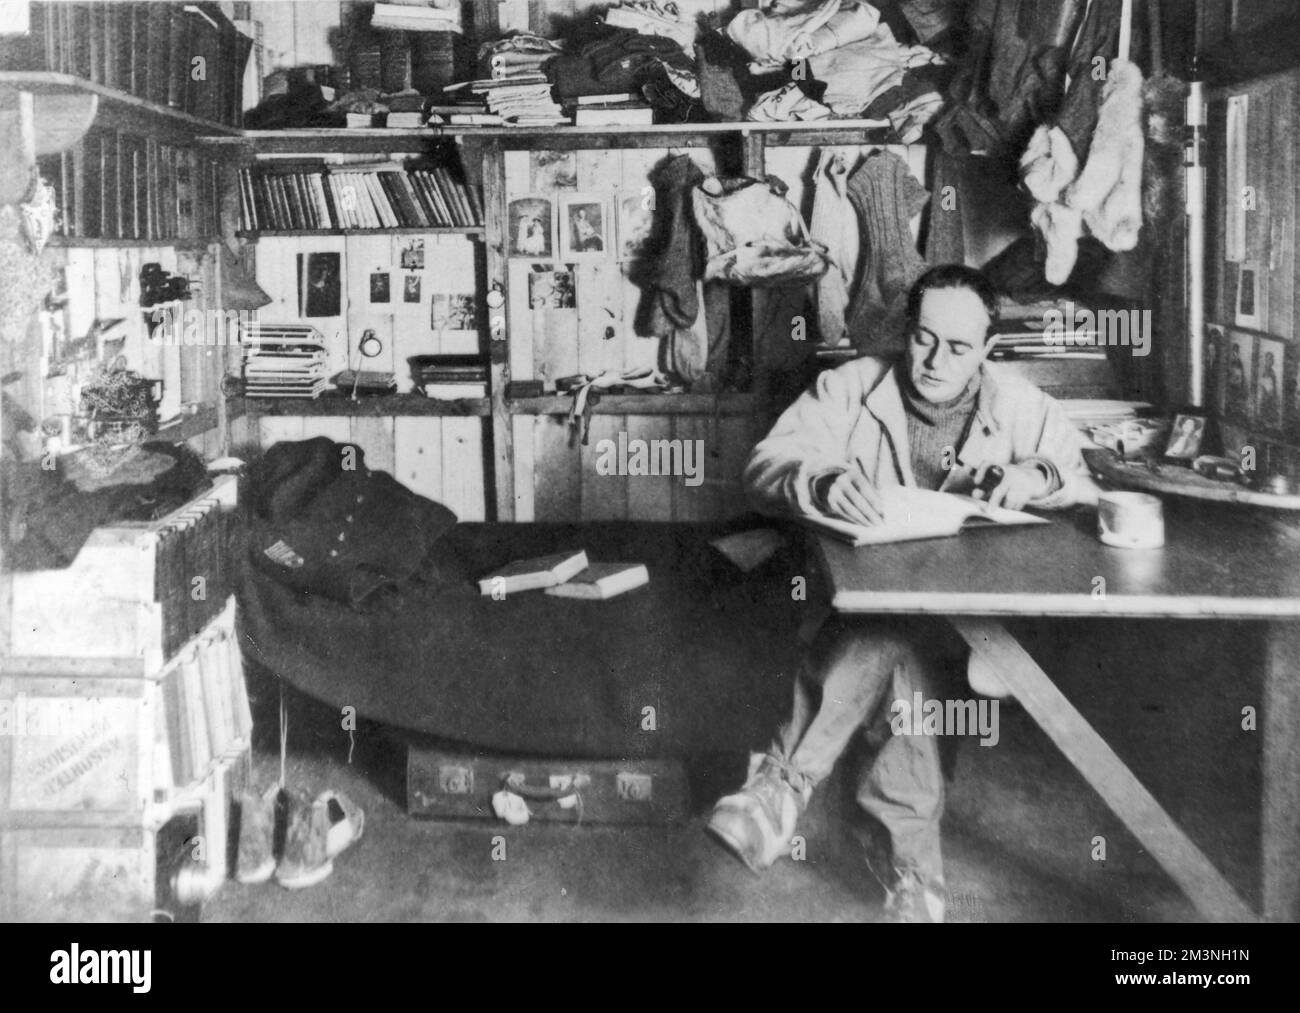 Captain Robert Falcon Scott (1868 - 1912), British polar explorer and leader of the ill-fated expedition to the South Pole in 1912, pictured in his work room on board the Terra Nova.     Date: 1911 Stock Photo